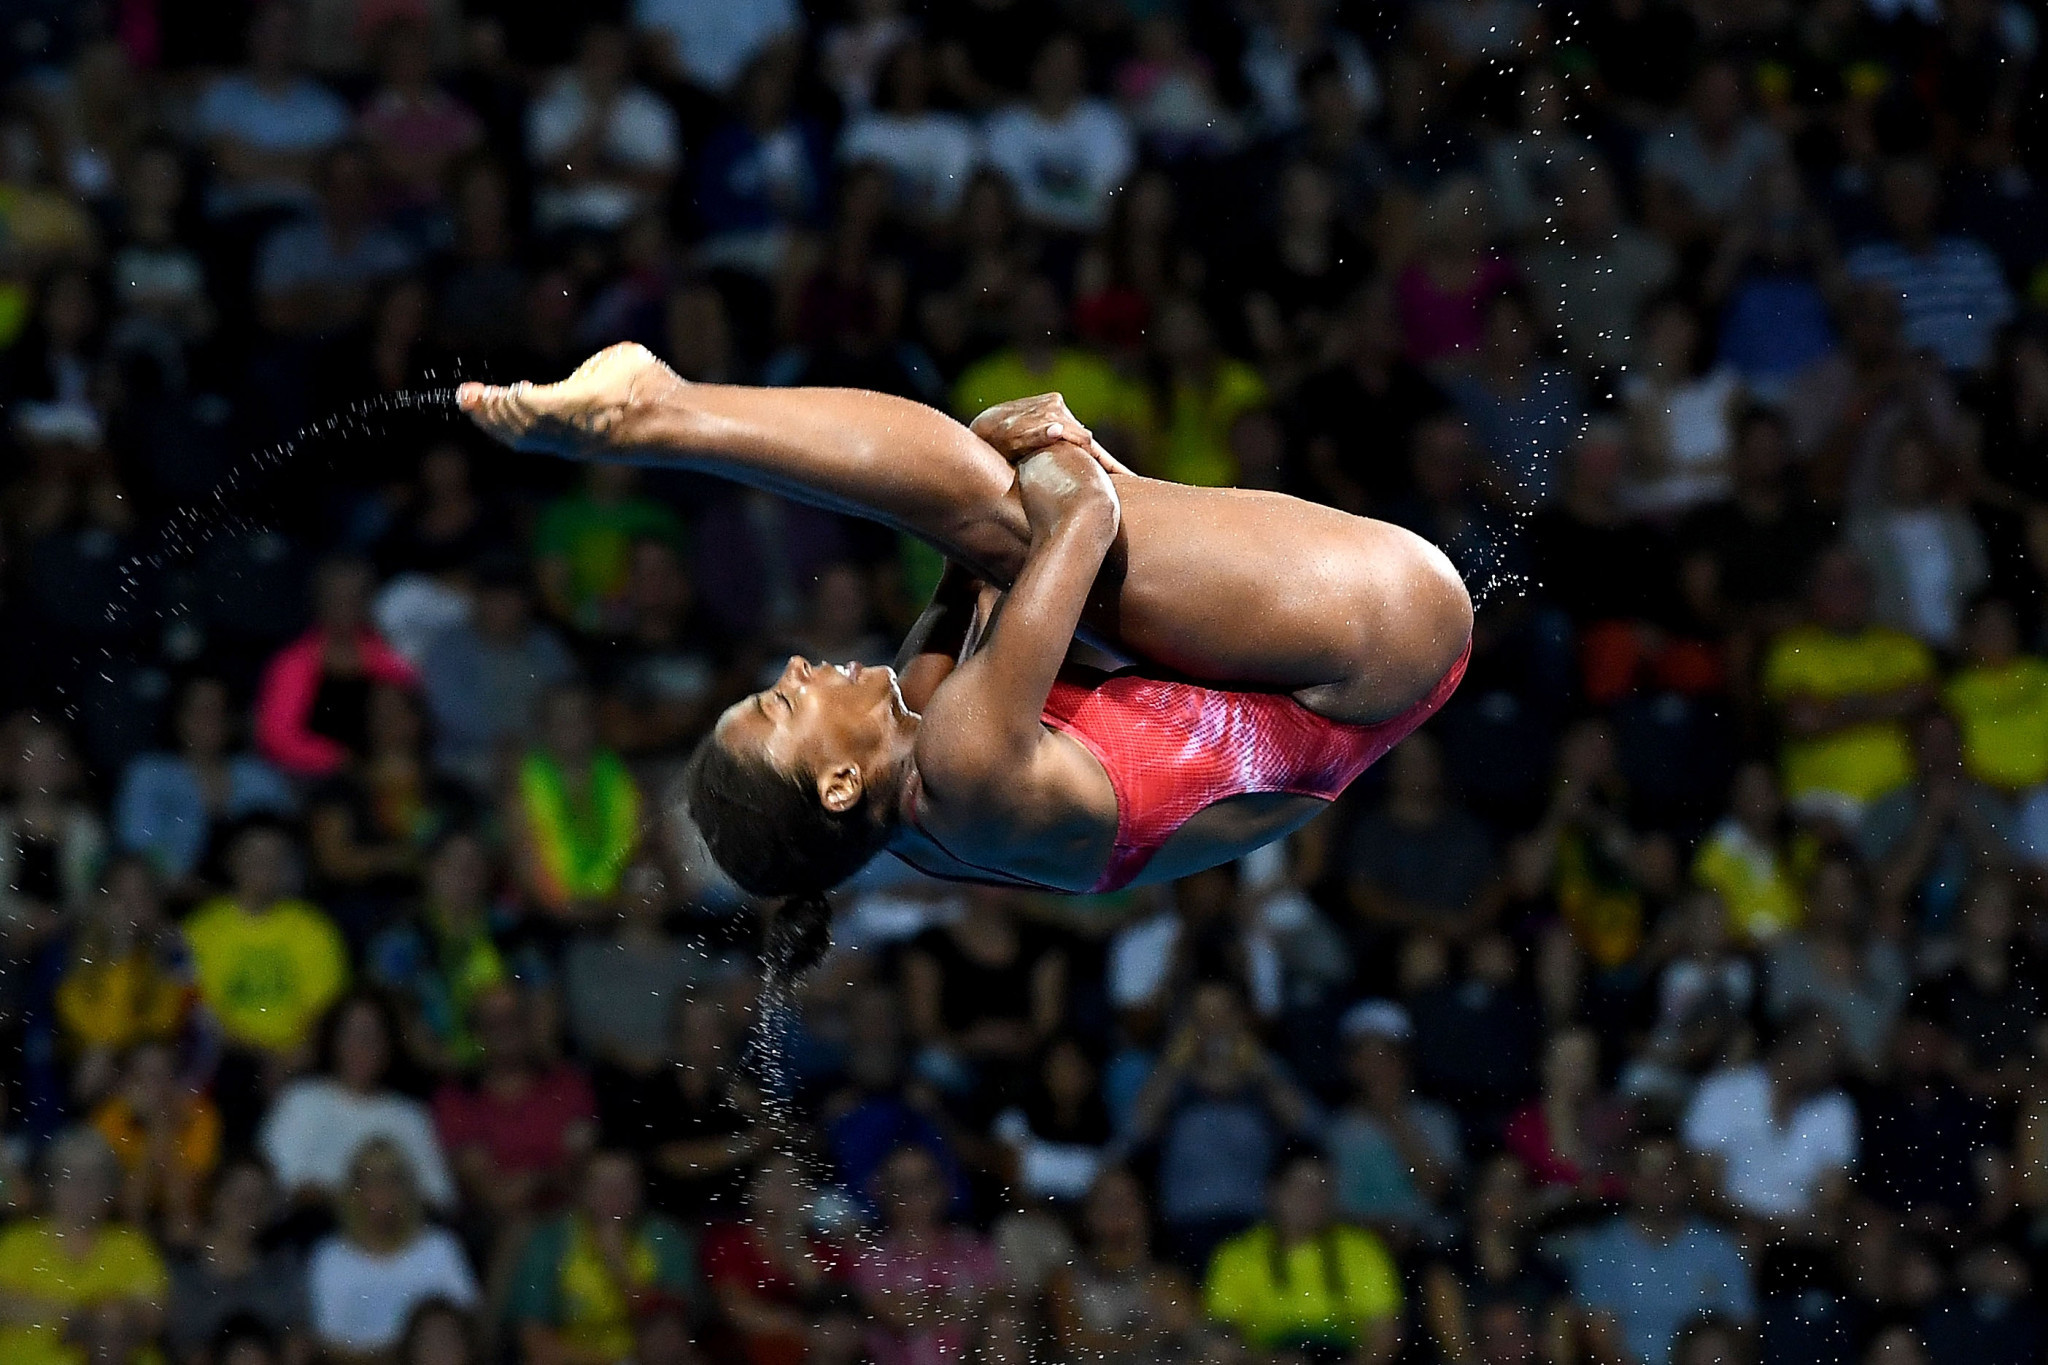 Canada's Jennifer Abel won the fourth Commonwealth Games gold medal of her career with victory in the 10m platform at Gold Coast 2018, narrowly beating Australia's Maddison Keeney ©Getty Images